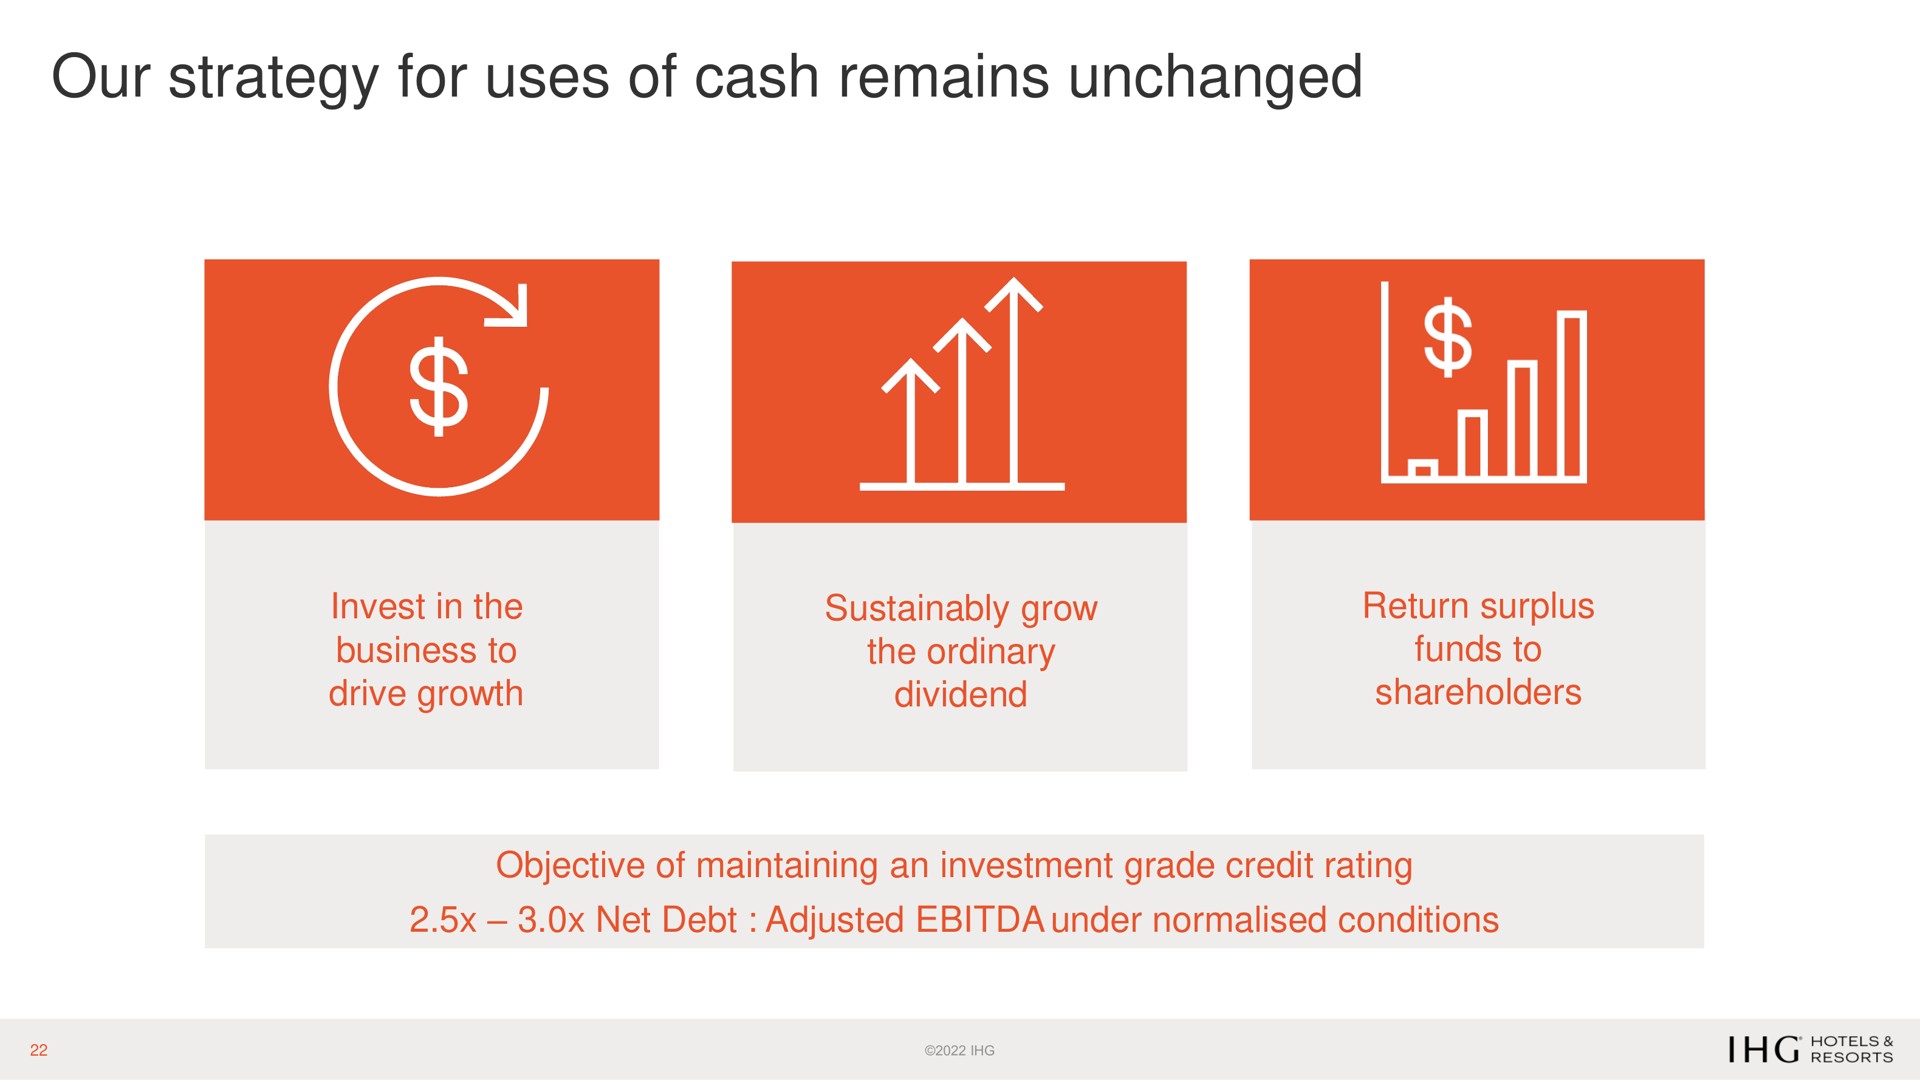 our strategy for uses of cash remains unchanged | IHG Hotels